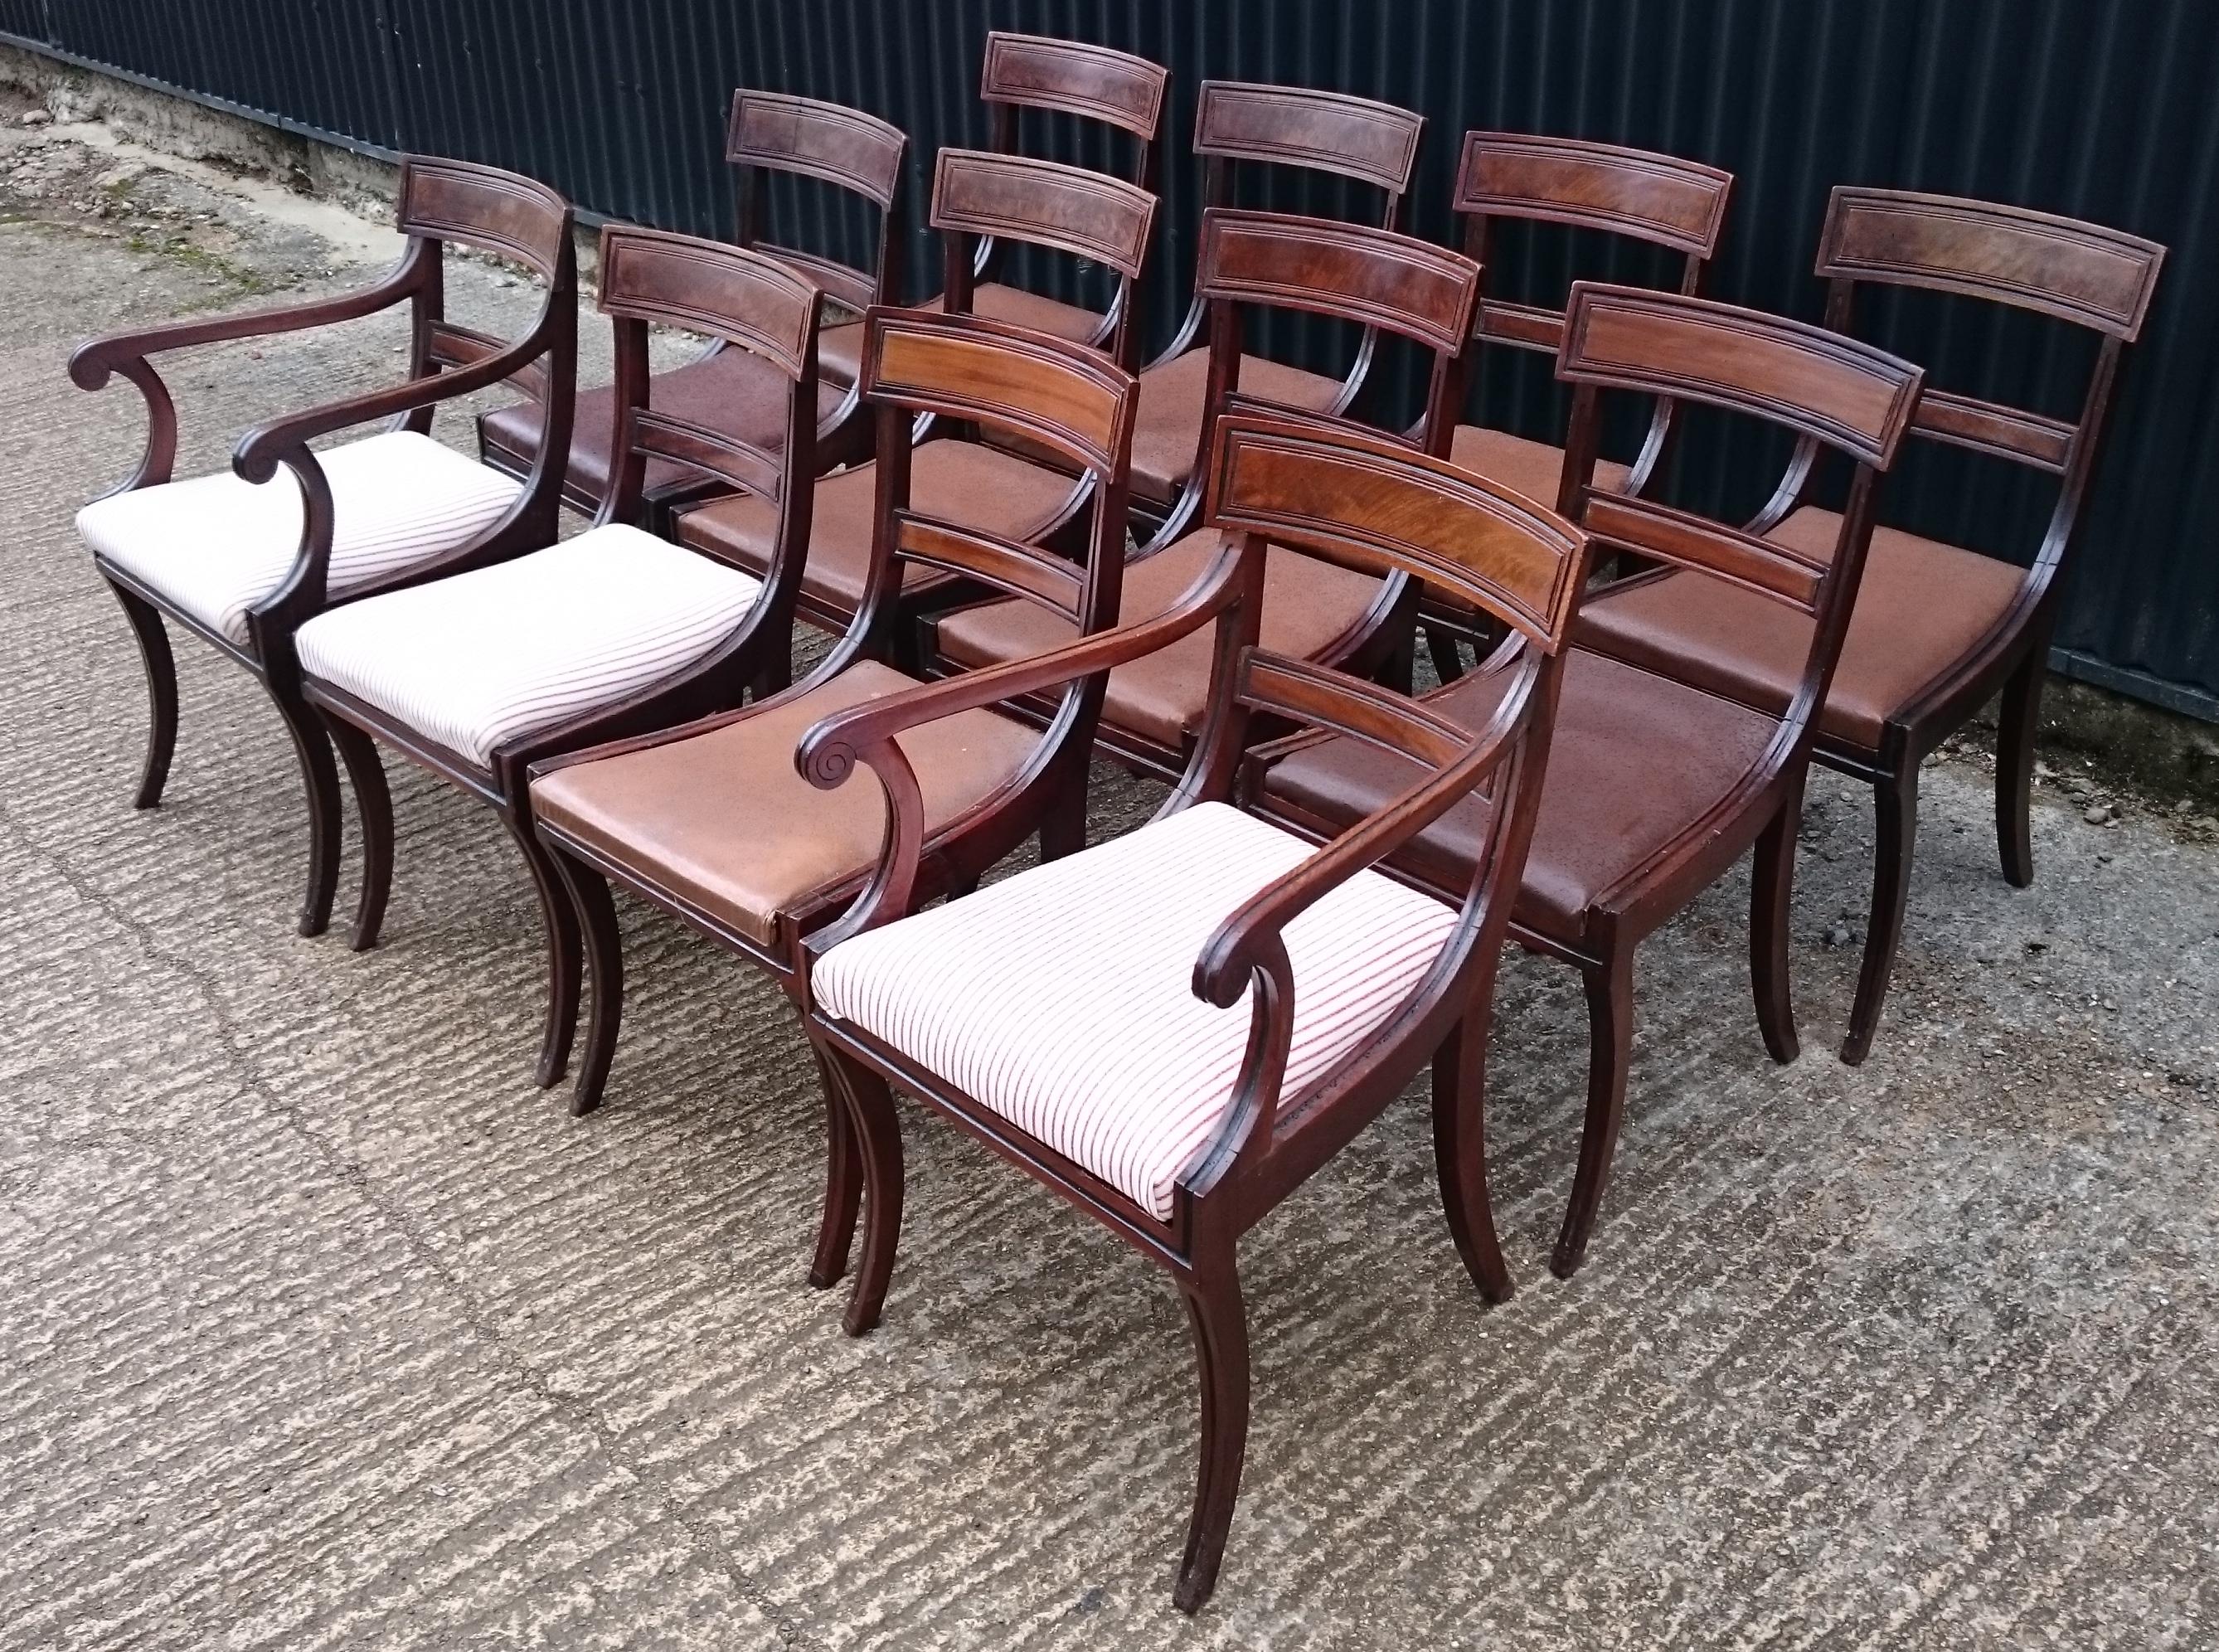 Set of Twelve Early 19th Century Regency Mahogany Antique Dining Chairs For Sale 2